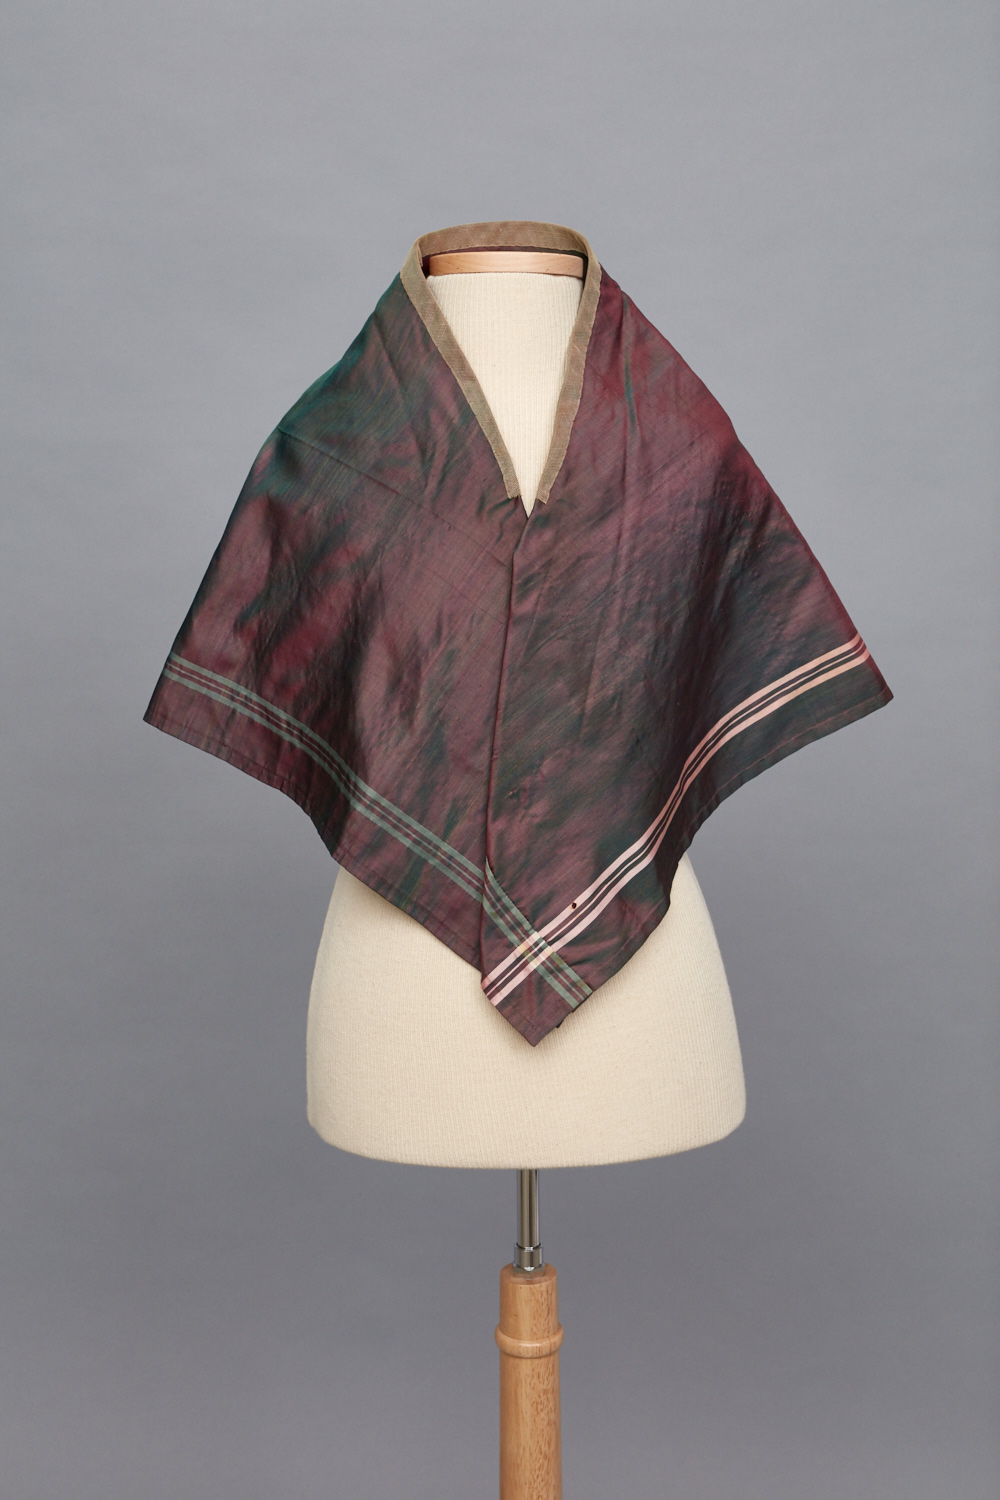 A red and green silk scarf on a mannequin.